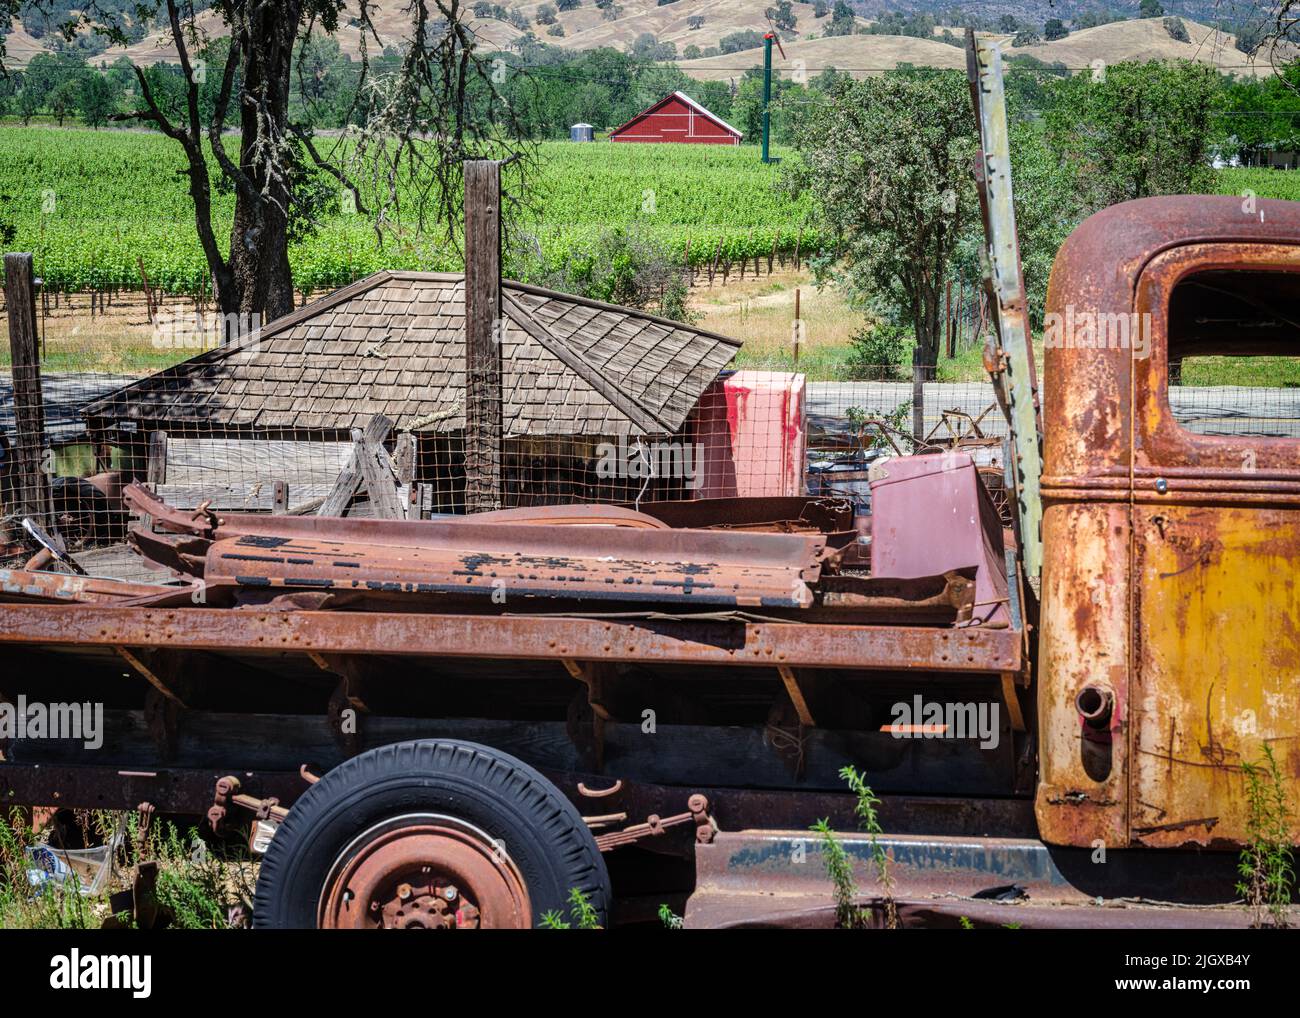 An old beautiful dilapidated Auto Junkyard in Pope Valley, California with a red barn & vineyard in the background Stock Photo